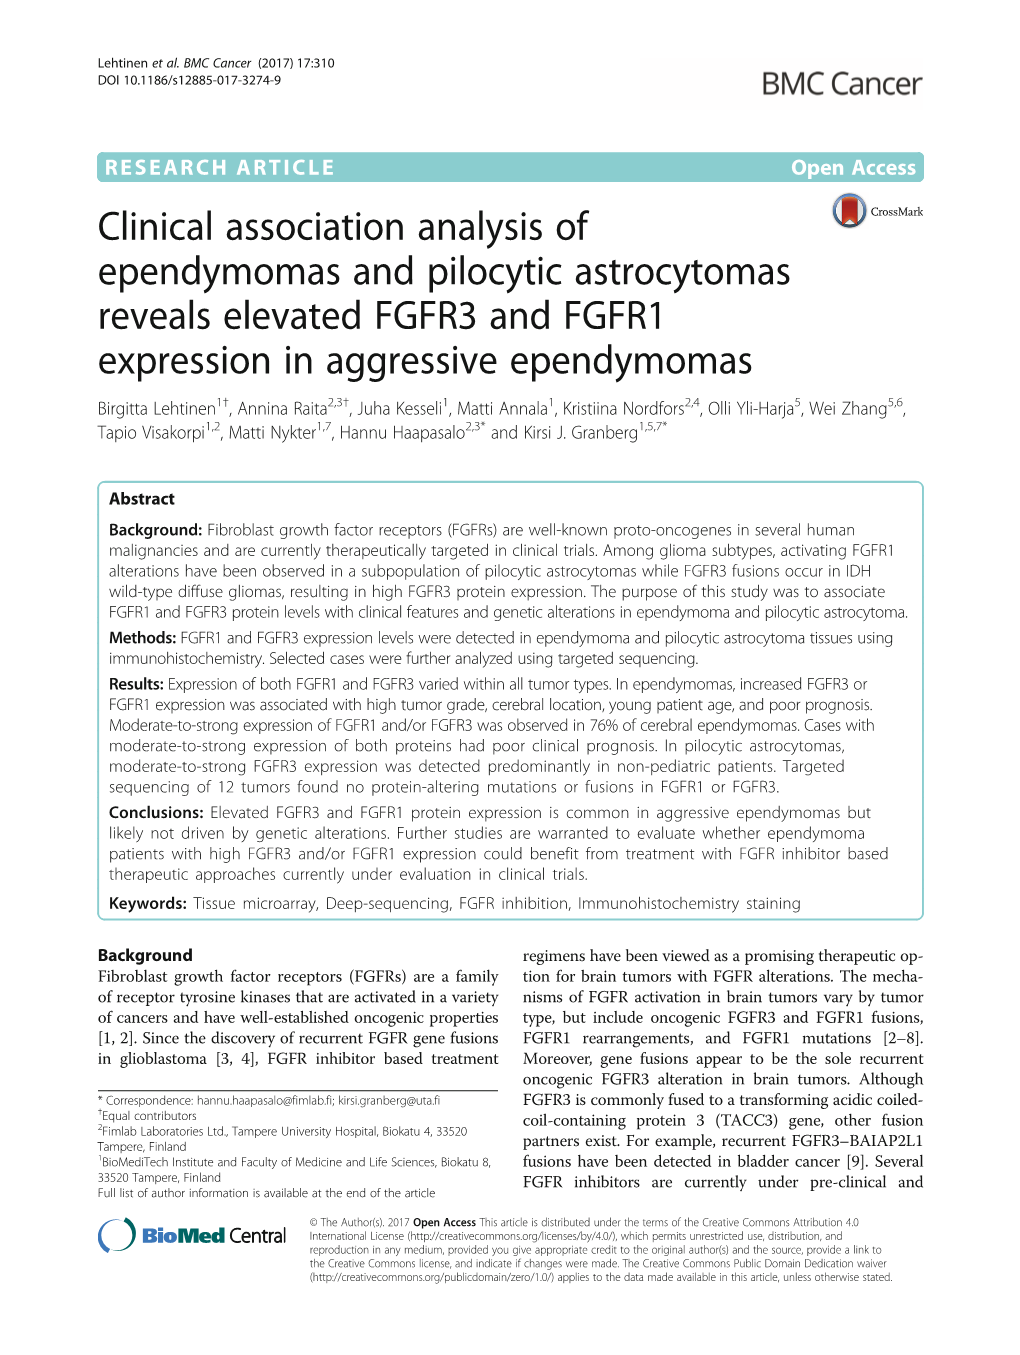 Clinical Association Analysis of Ependymomas and Pilocytic